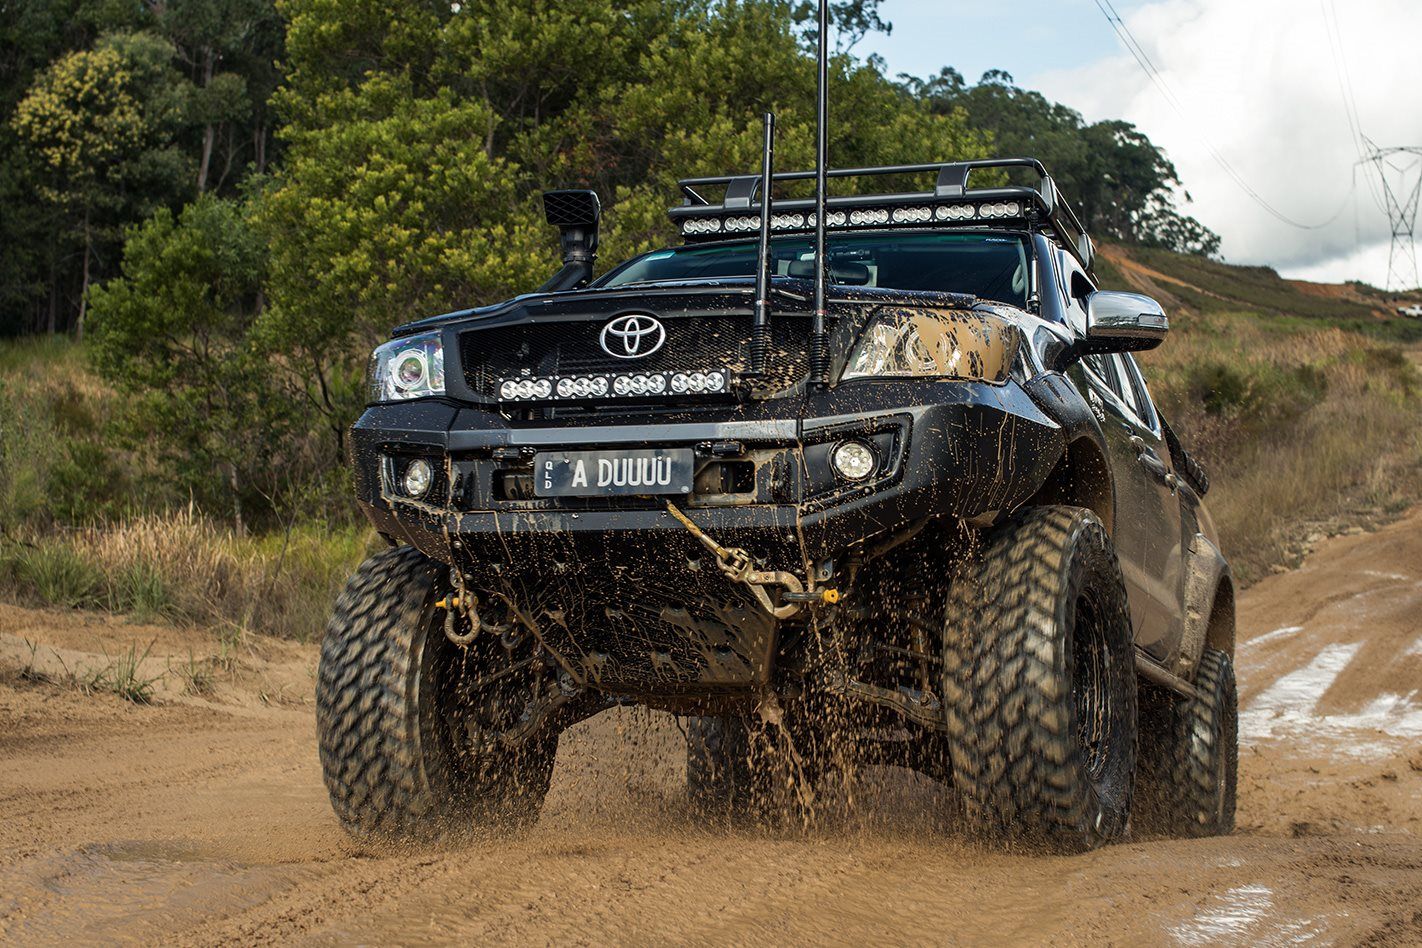 Modded toyota hilux truck off-road